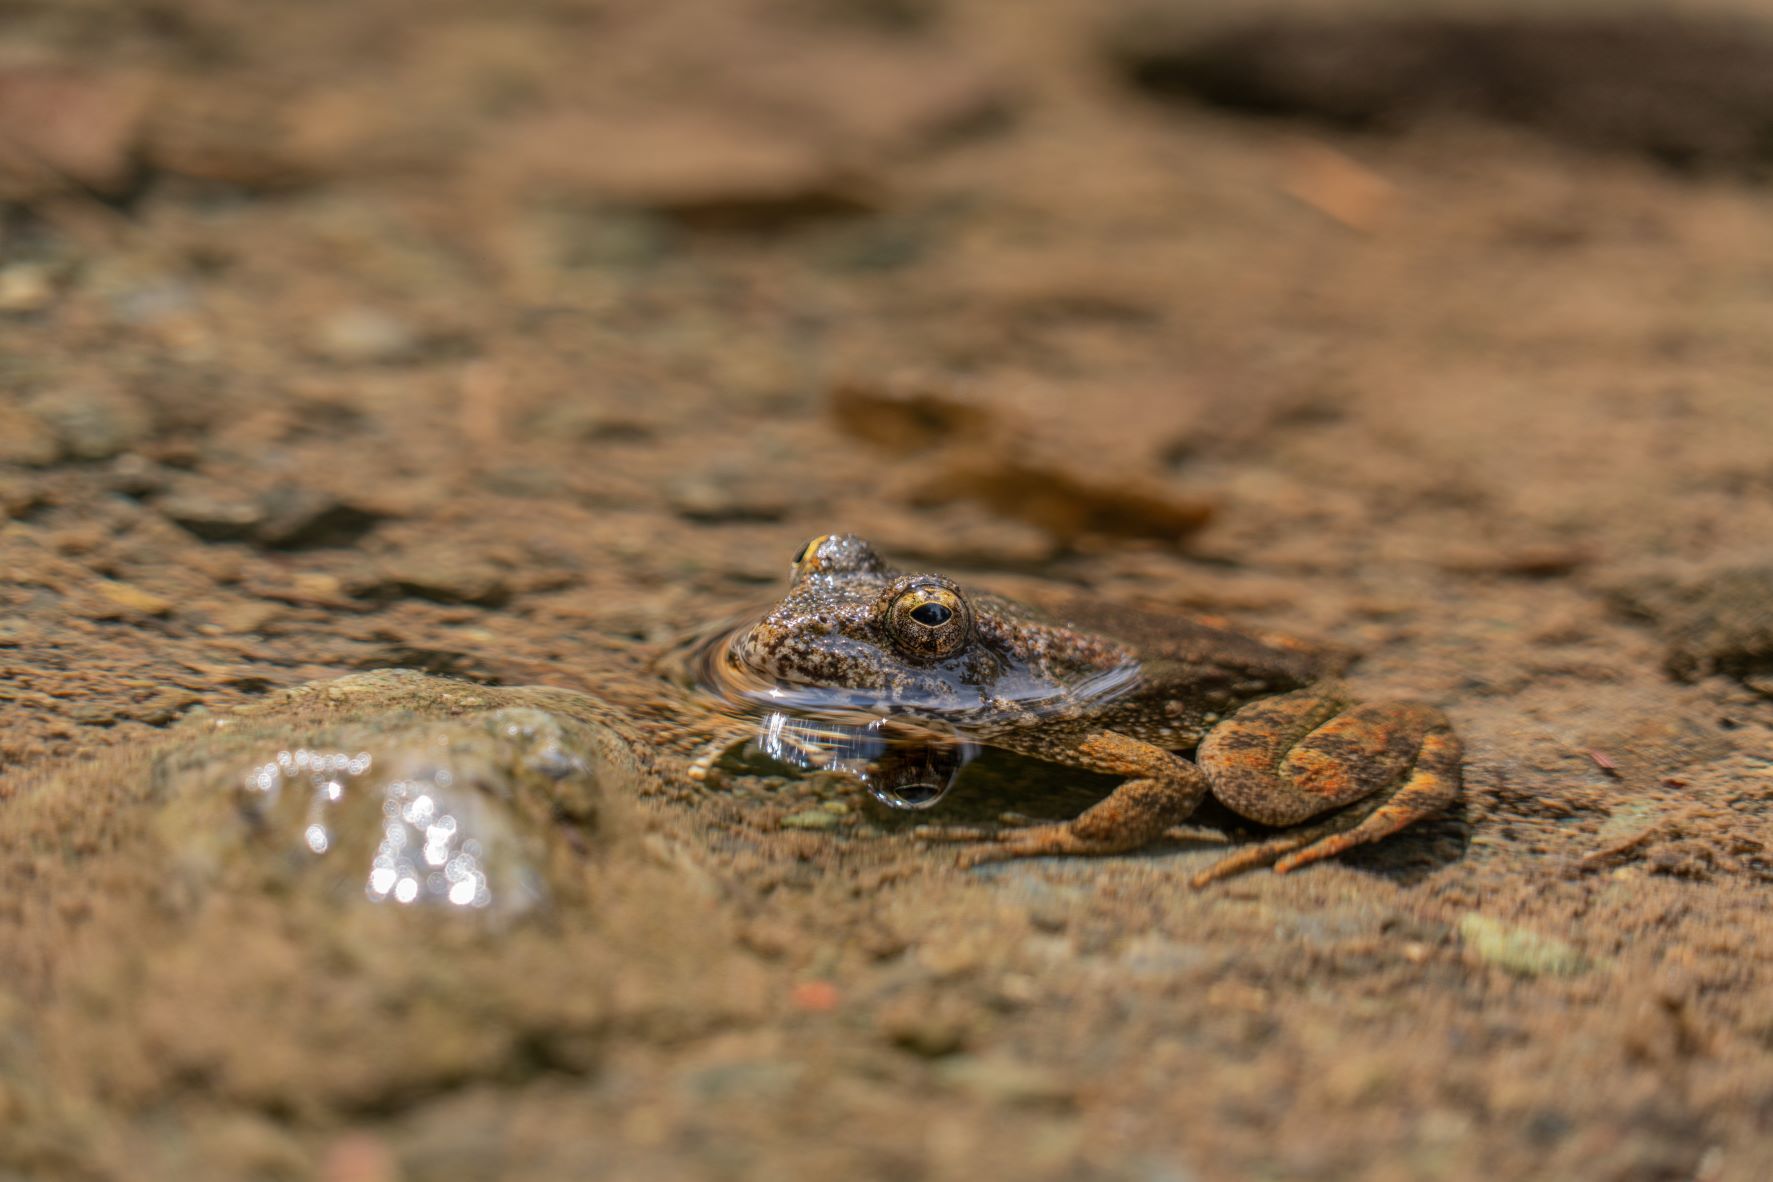 Foothill yellow-legged frog by Ben DeDominic